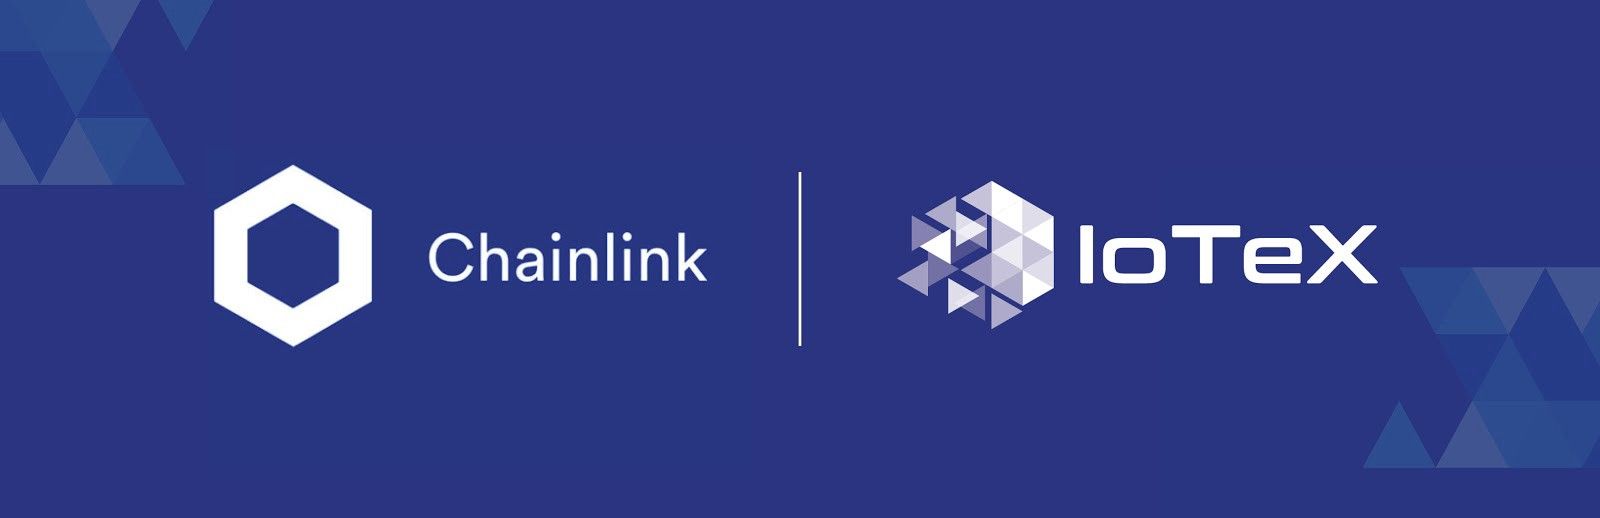 chainlink-data-in-real-time